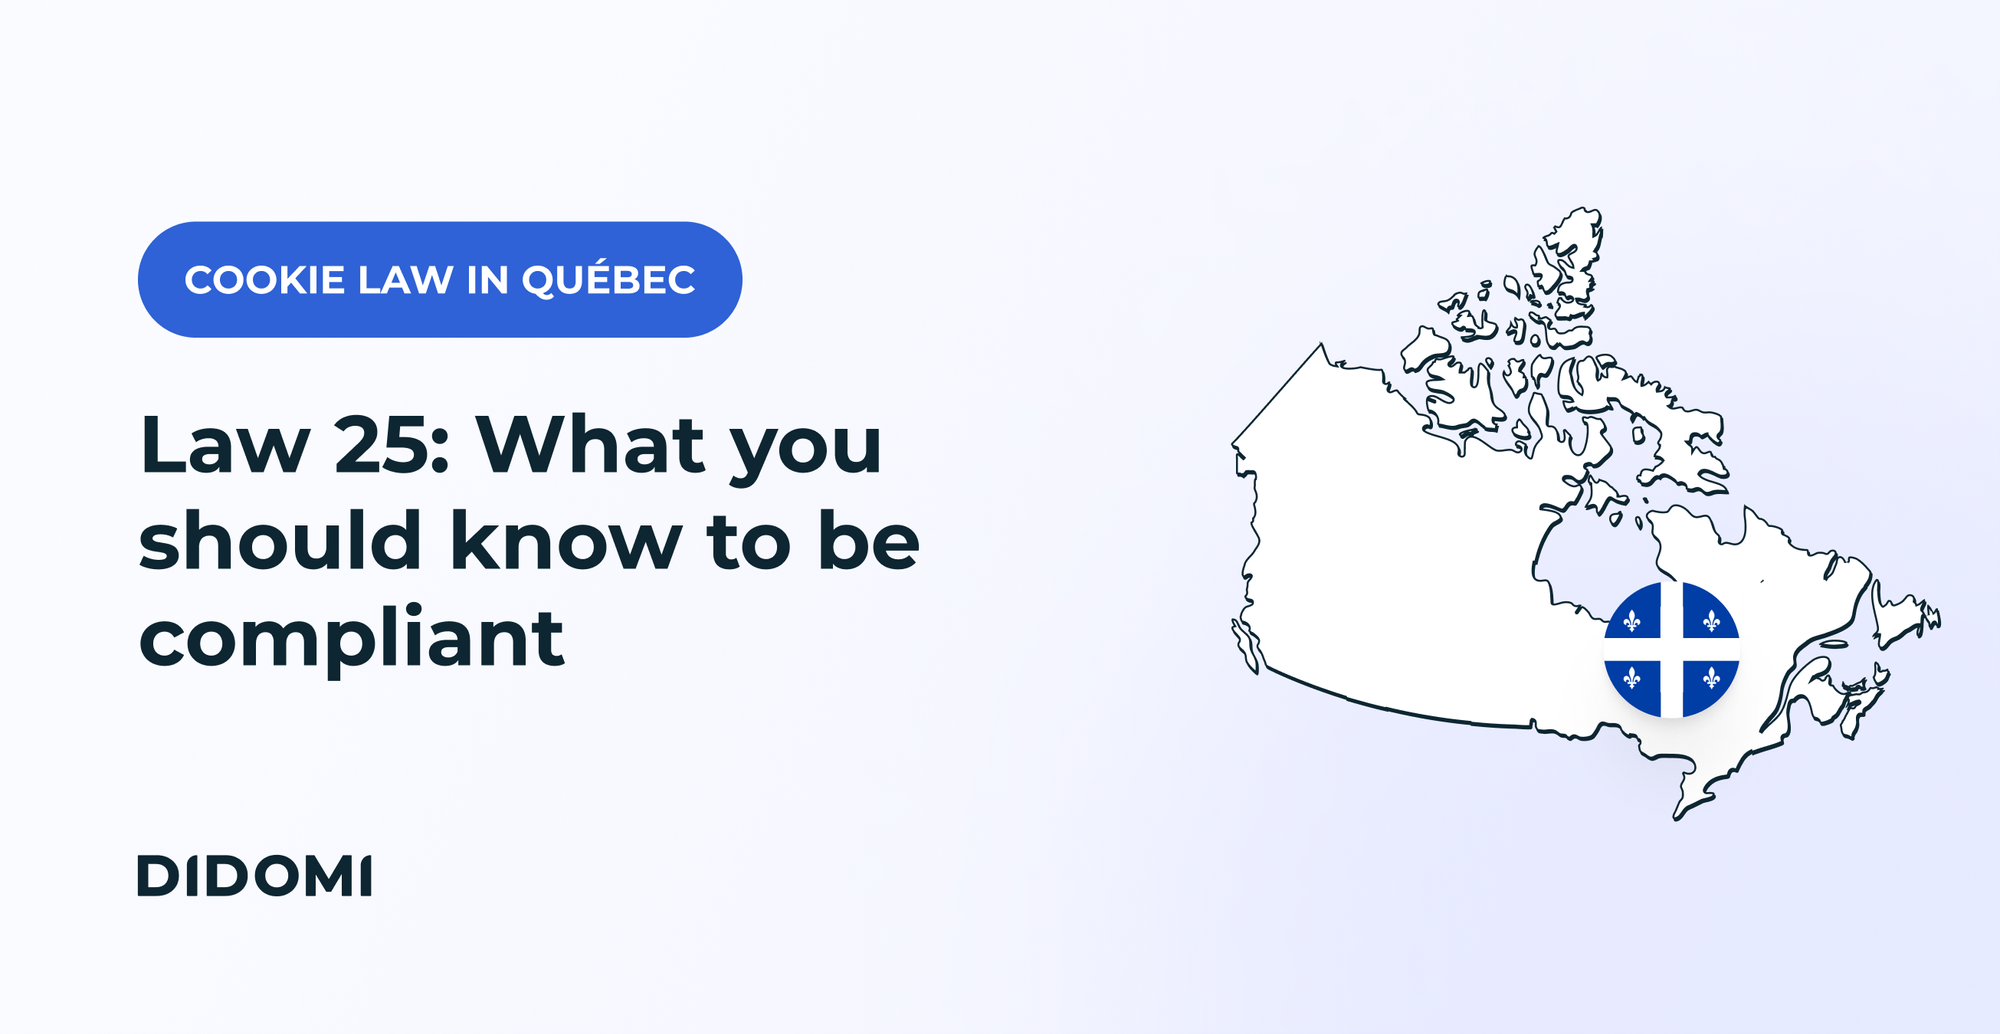 A map of québec with the title "Quebec's Law 25: Everything you need to know" and the Didomi logo